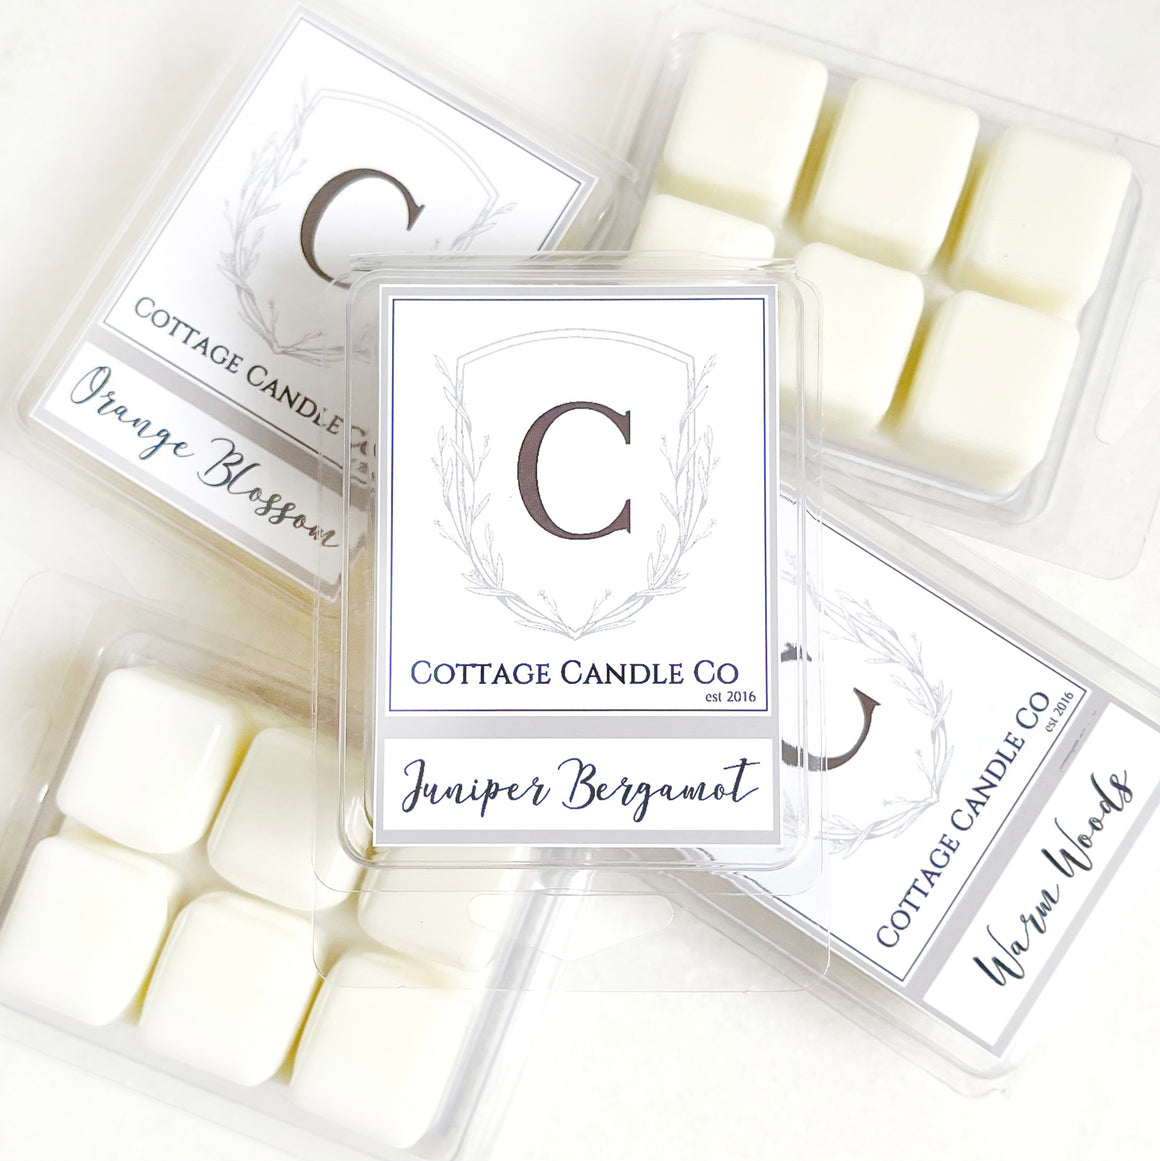 WAX MELTS - CHOOSE YOUR FAVORITE SCENT